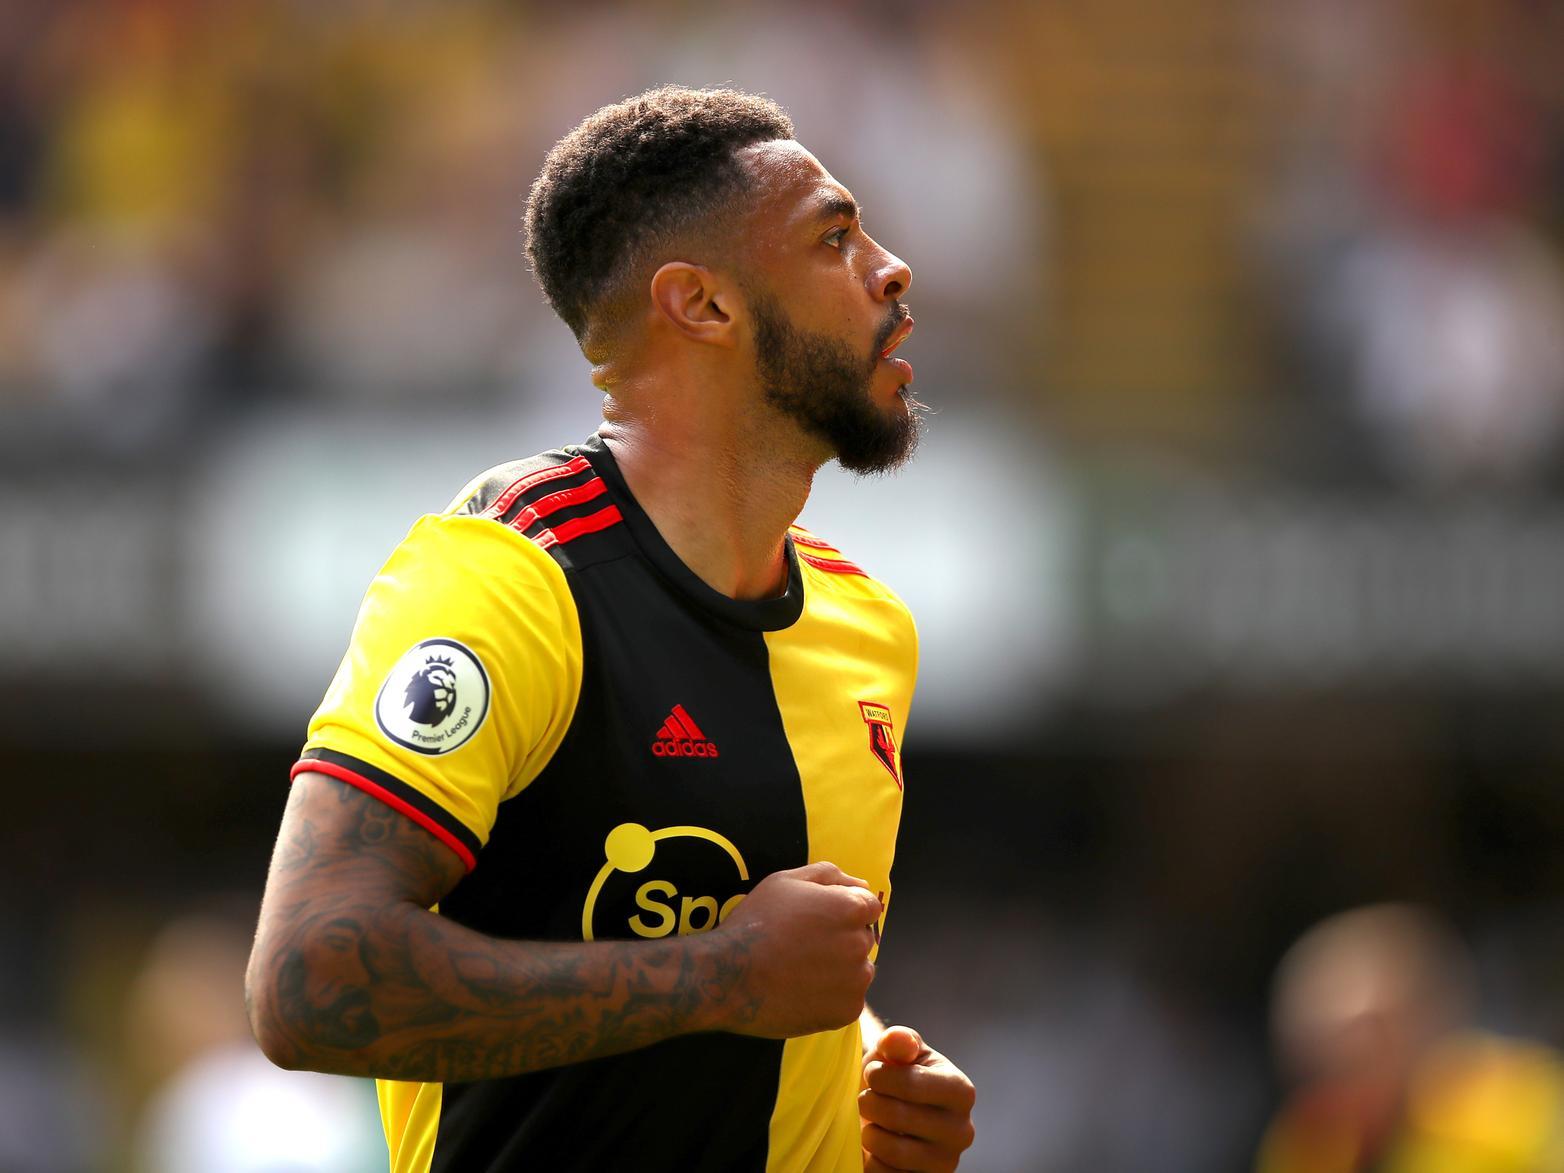 Leeds United have become odds on, 1/2 favourites to land Watford's 18.5m striker Andre Gray in the January transfer window, as he continues to struggle for game time at the club. (Sky Bet)